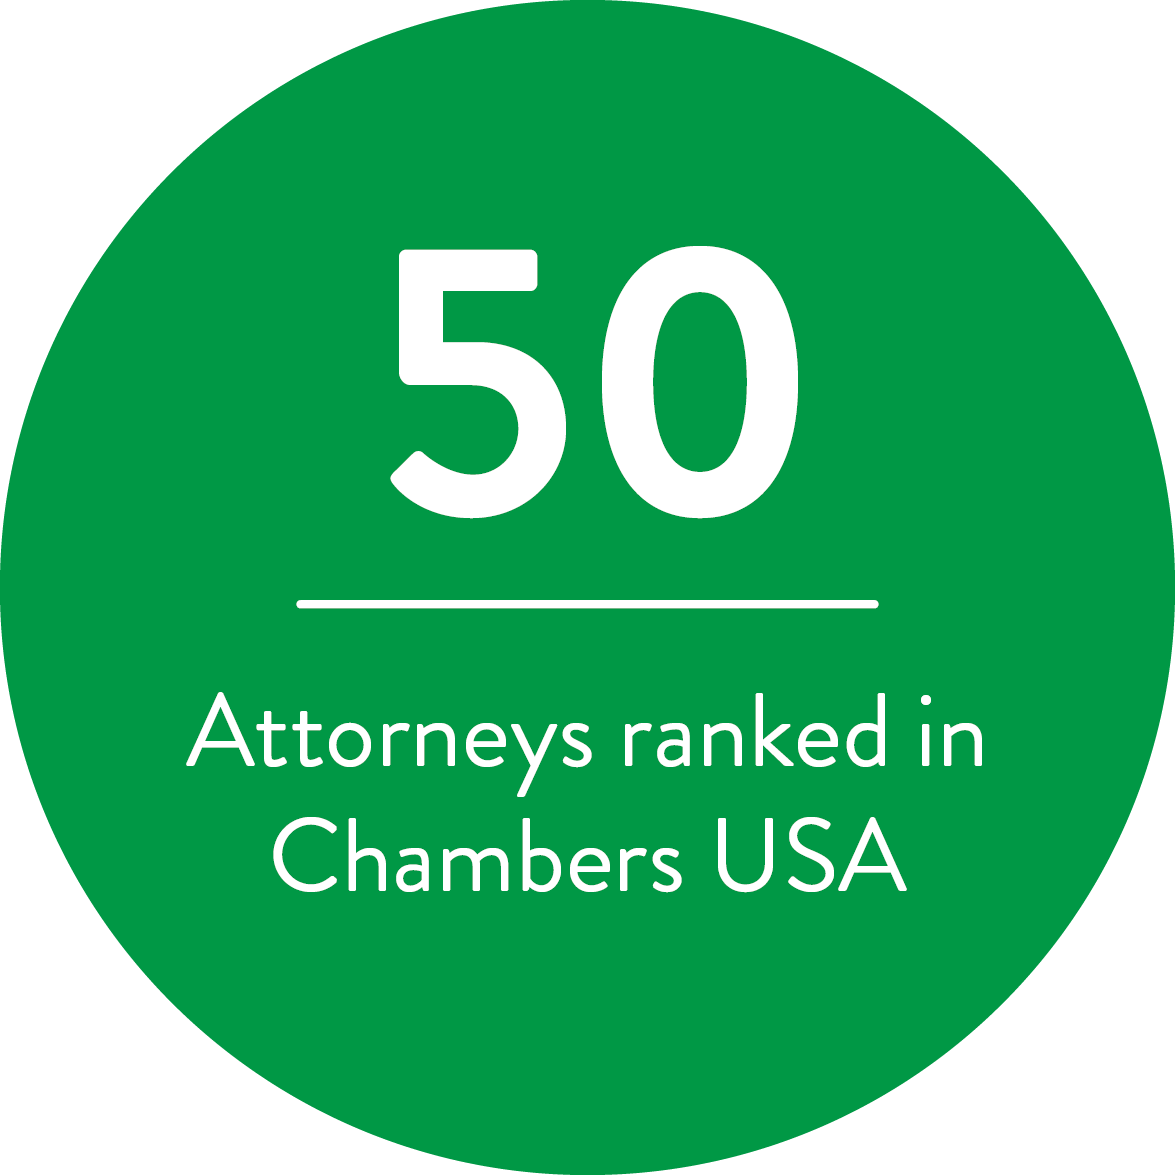 50 Attorneys ranked in Chambers USA